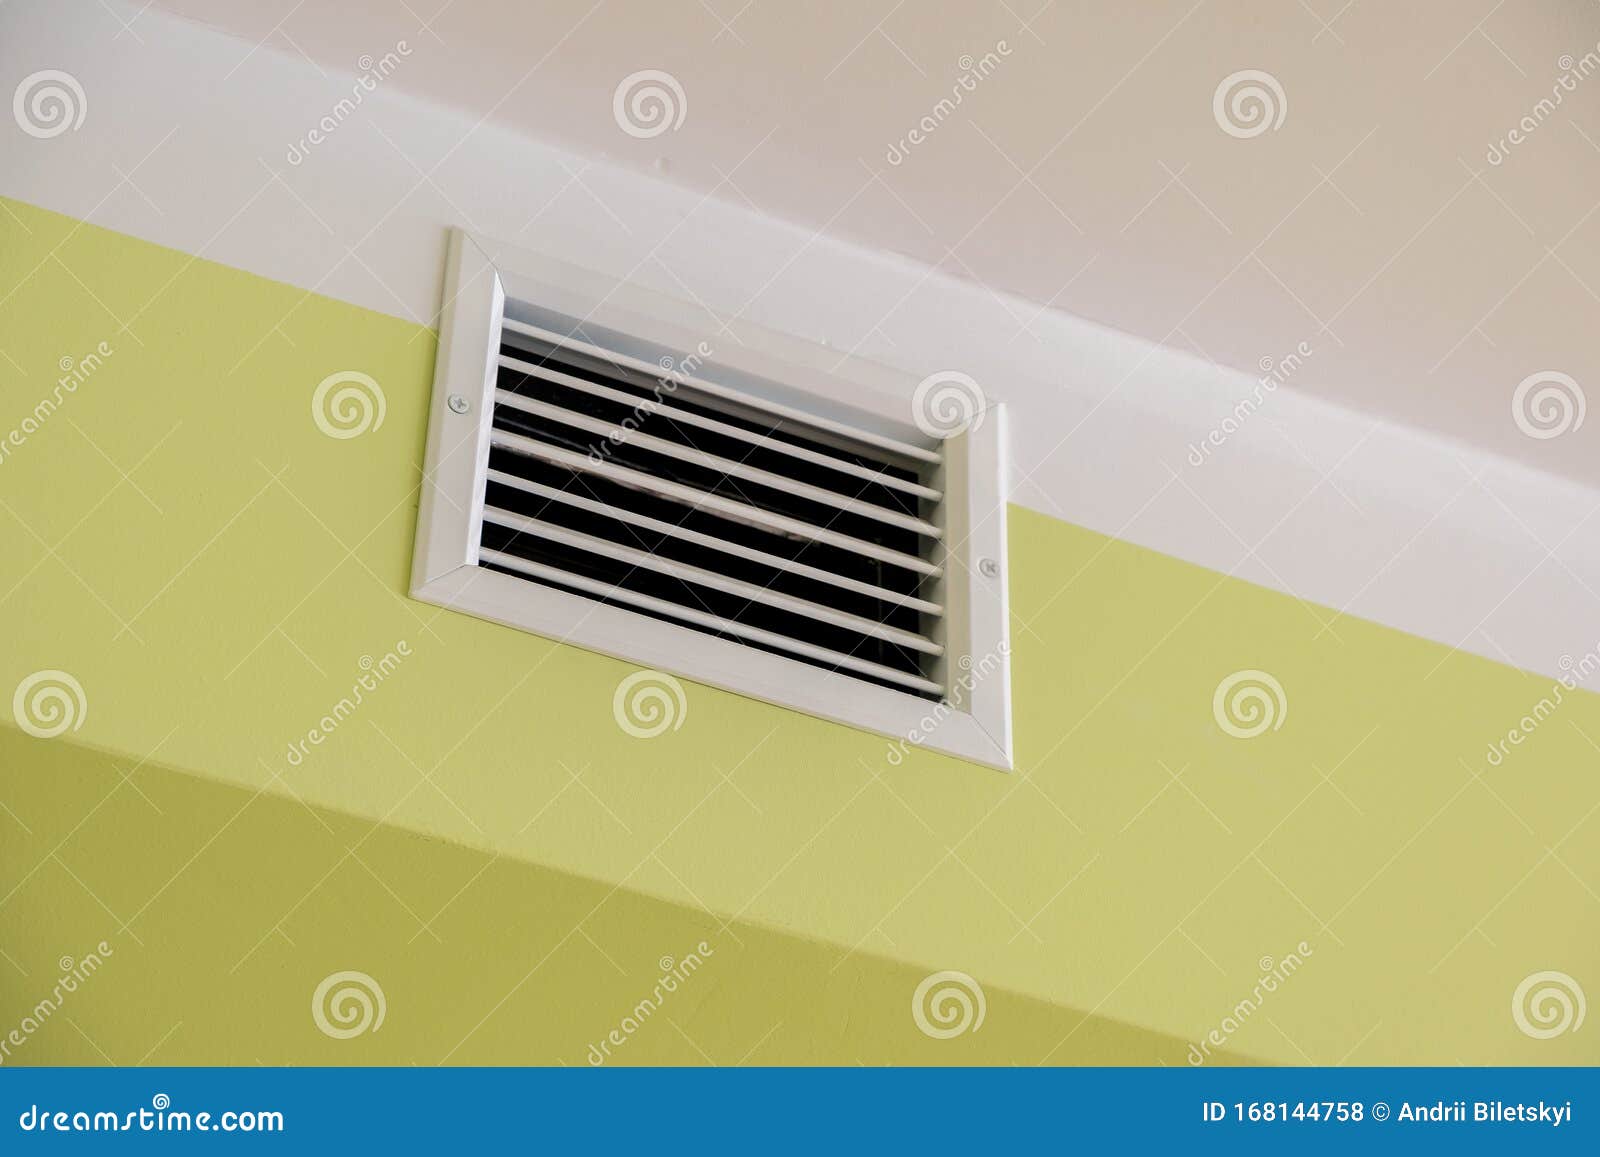 ventilation shaft with air grates on the ceiling